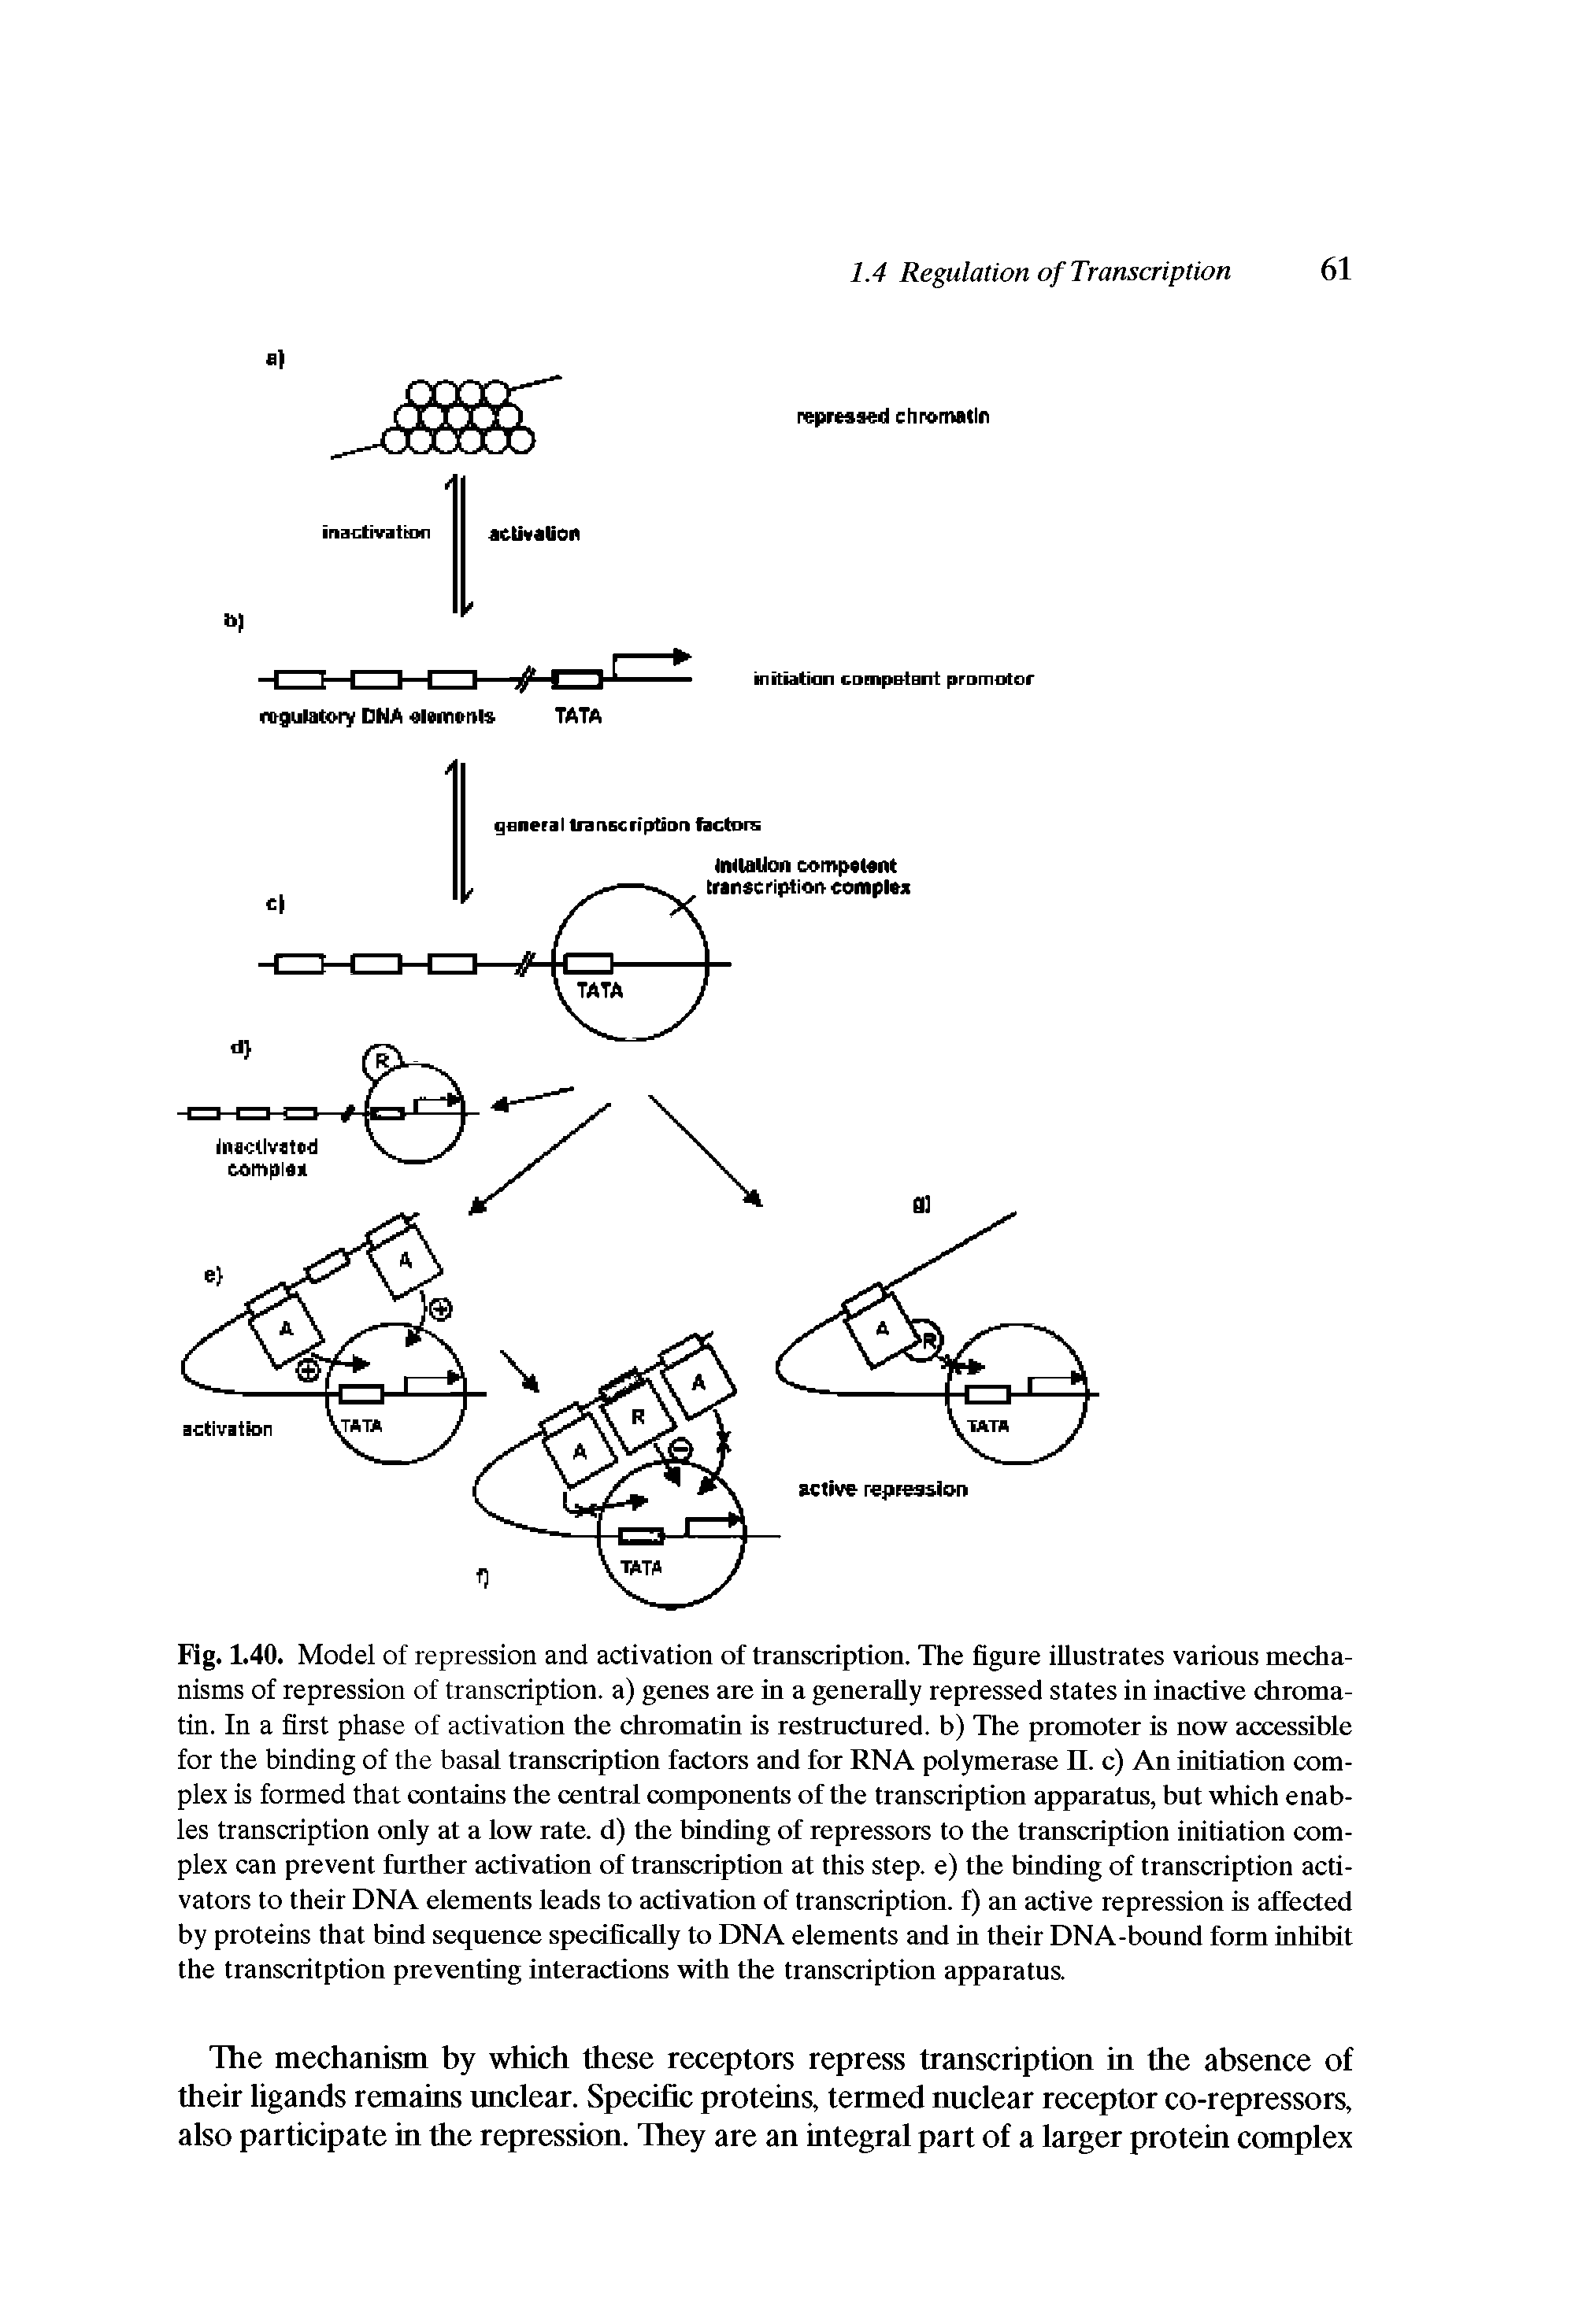 Fig. 1.40. Model of repression and activation of transcription. The figure illustrates various mechanisms of repression of transcription, a) genes are in a generally repressed states in inactive chromatin. In a first phase of activation the chromatin is restrnctured. b) The promoter is now accessible for the binding of the basal transcription factors and for RNA polymerase II. c) An initiation complex is formed that contains the central components of the transcription apparatns, bnt which enables transcription only at a low rate, d) the binding of repressors to the transcription initiation complex can prevent fnrther activation of transcription at this step, e) the binding of transcription activators to their DNA elements leads to activation of transcription, f) an active repression is affected by proteins that bind seqnence specifically to DNA elements and in their DNA-bound form inhibit the transcritption preventing interactions with the transcription apparatus.